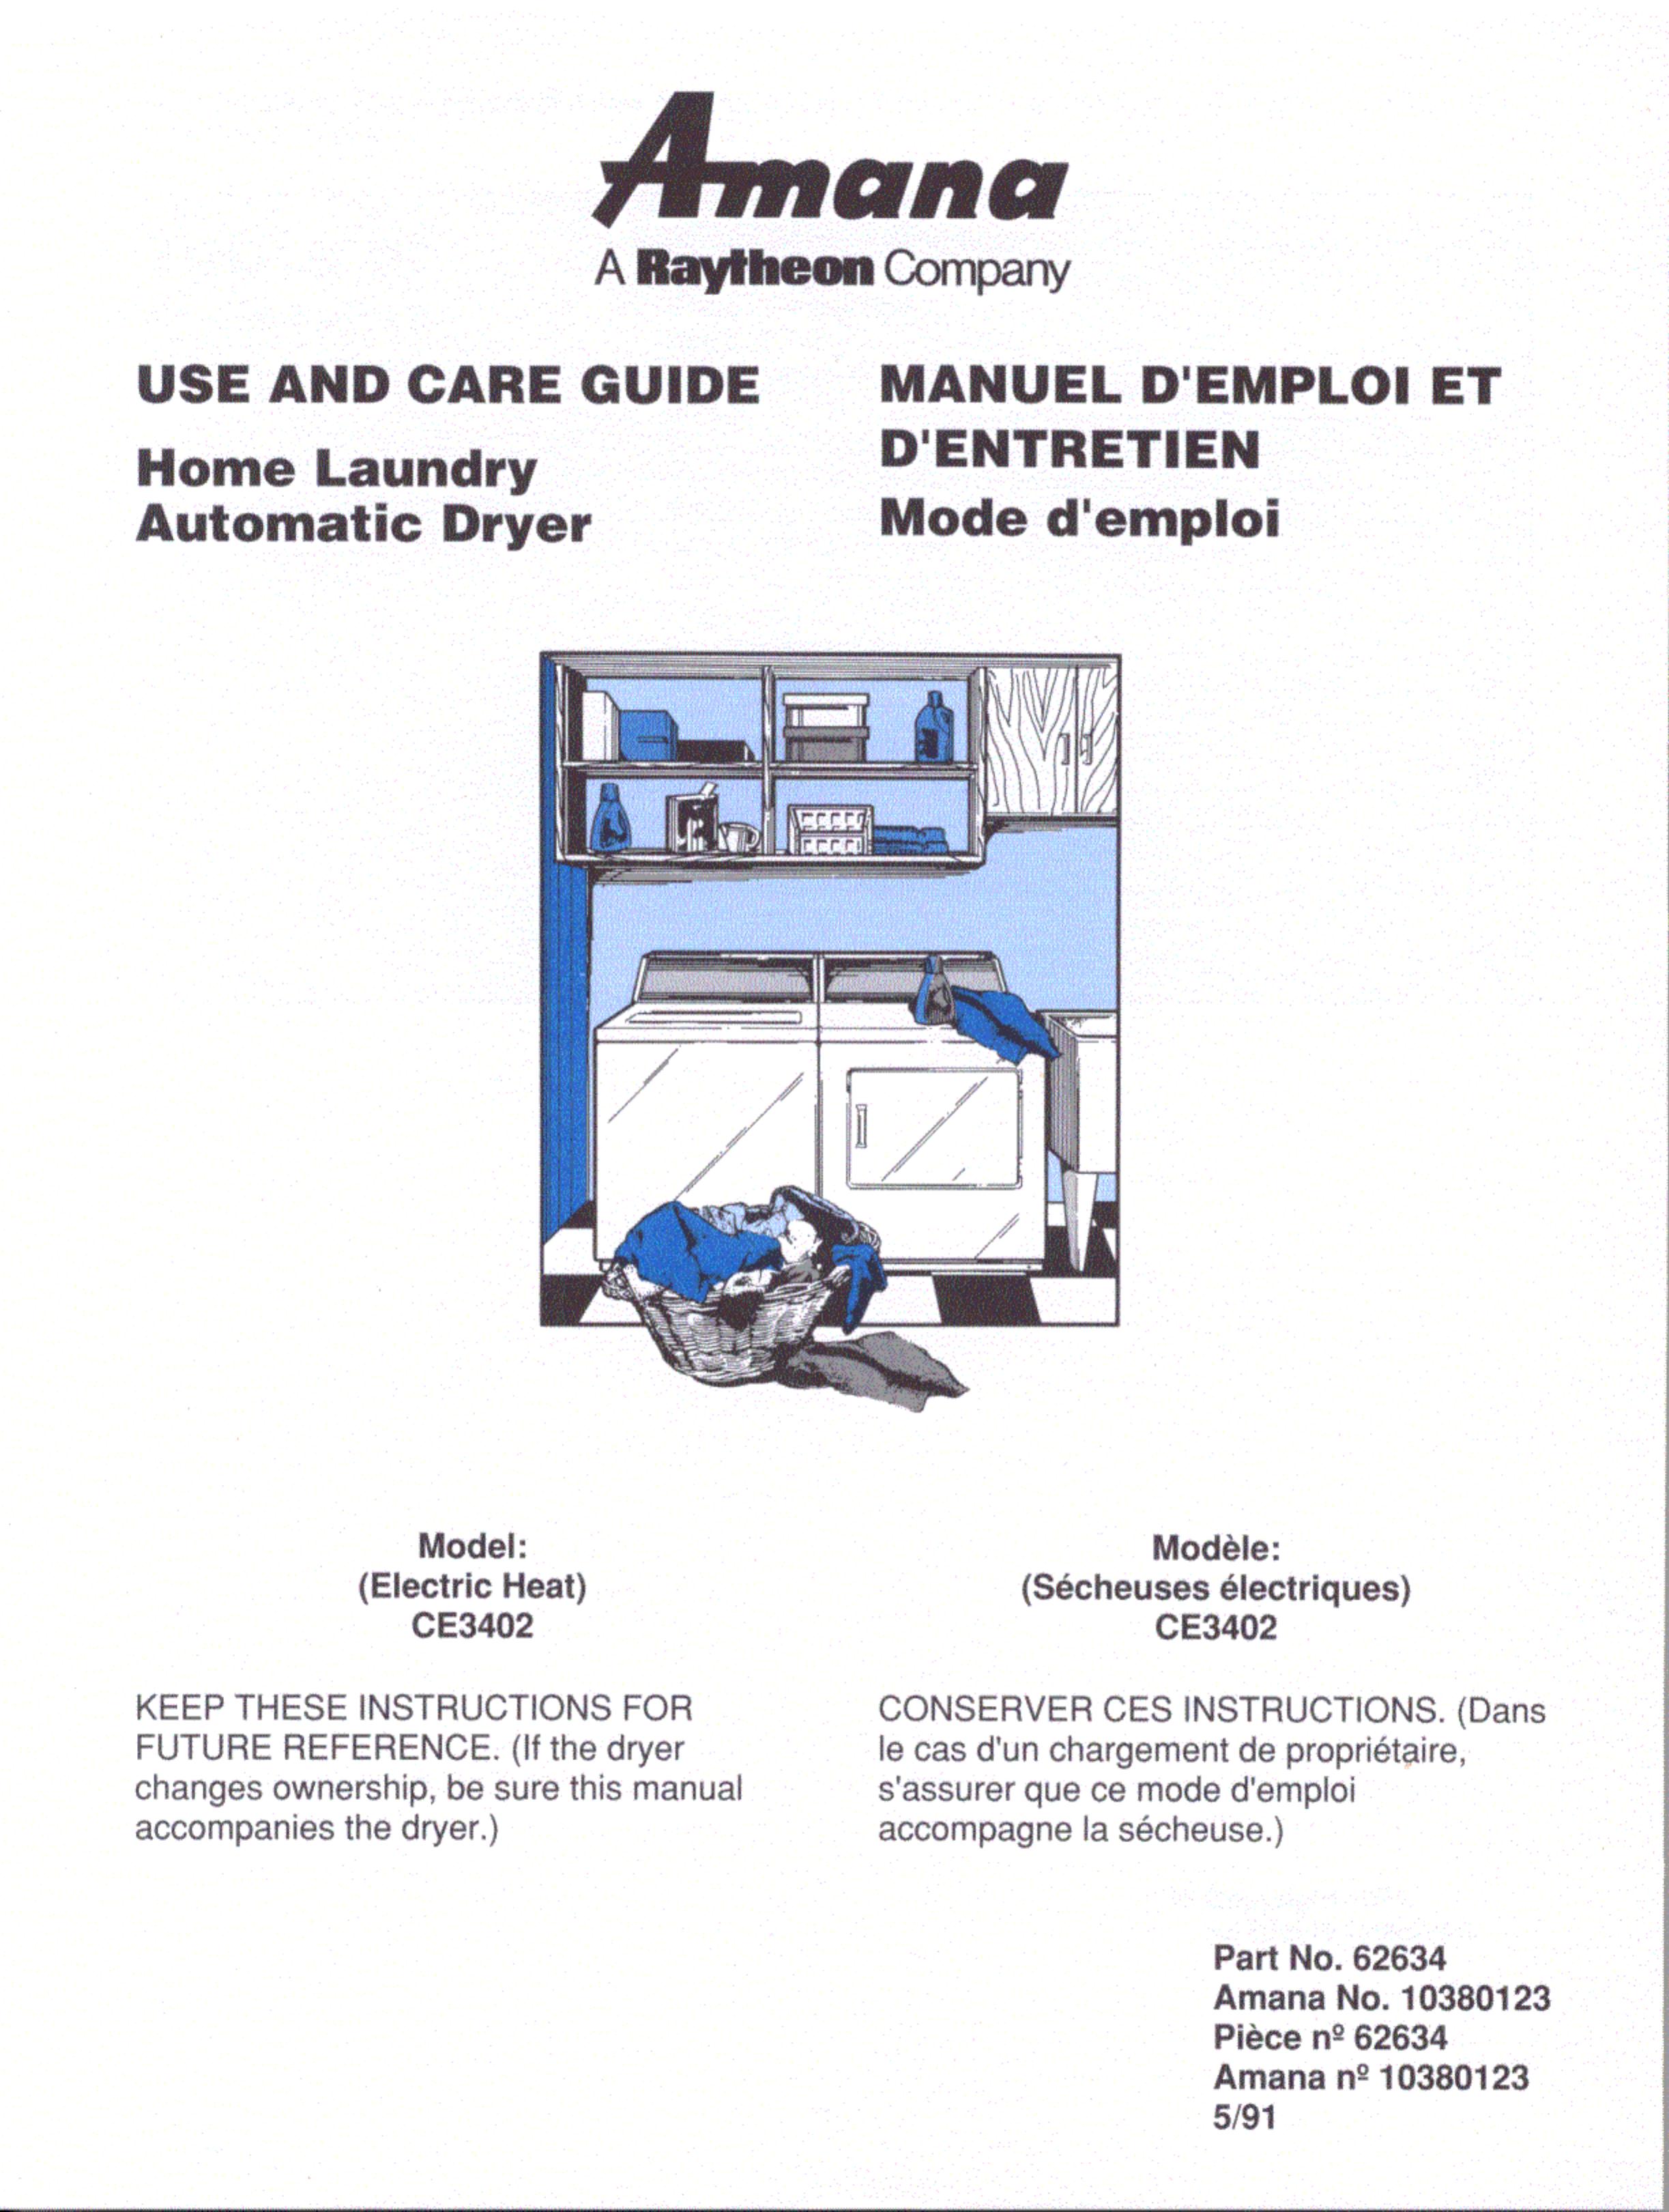 Amana CE3402 Clothes Dryer User Manual